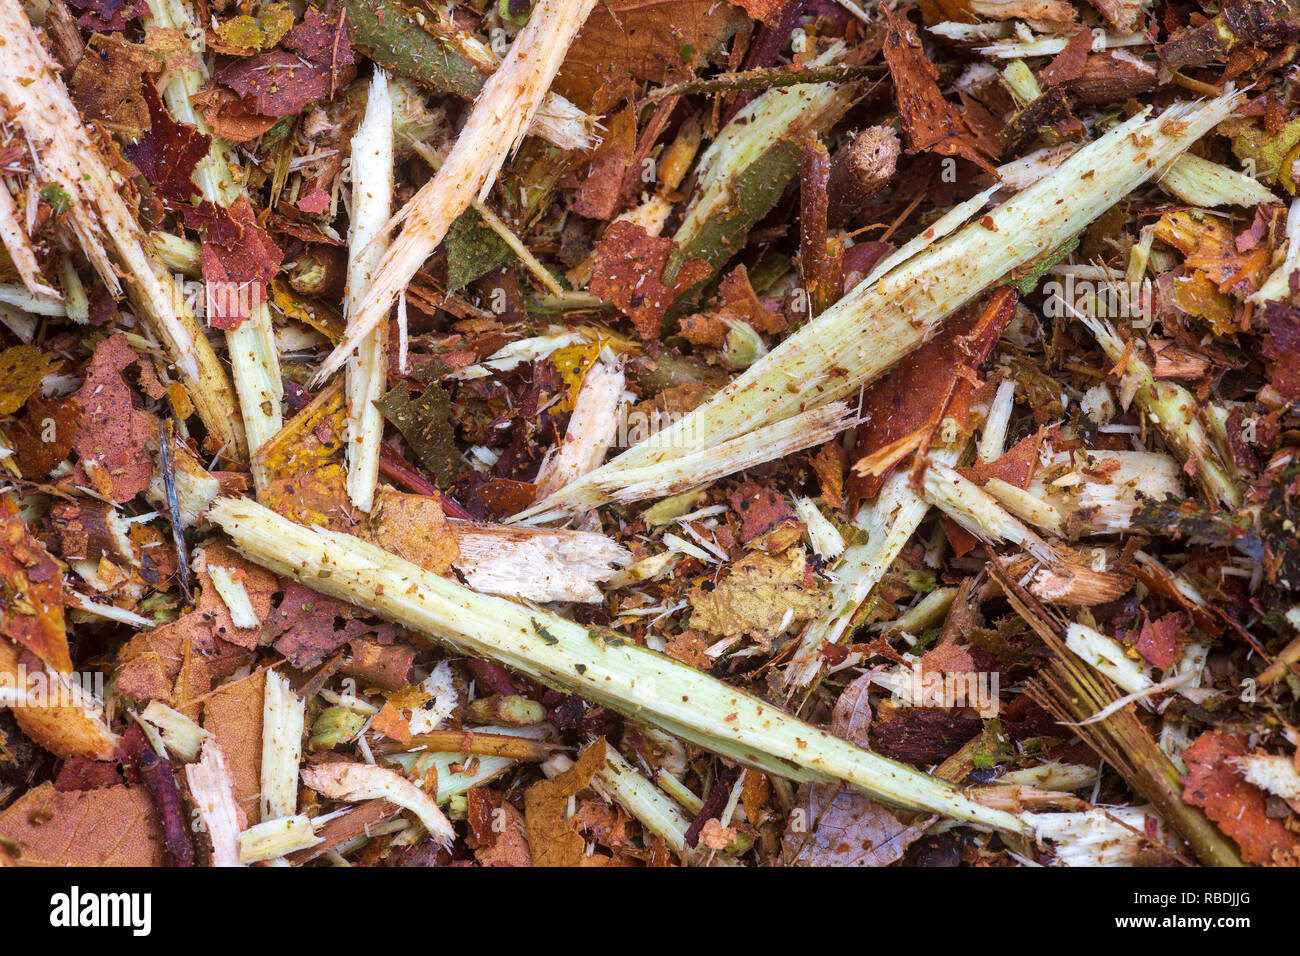 A close picture of a ramial chipped wood (RCW) heap. Used as mulch, those woodchips serve to reinstate the soil biological activity. Stock Photo